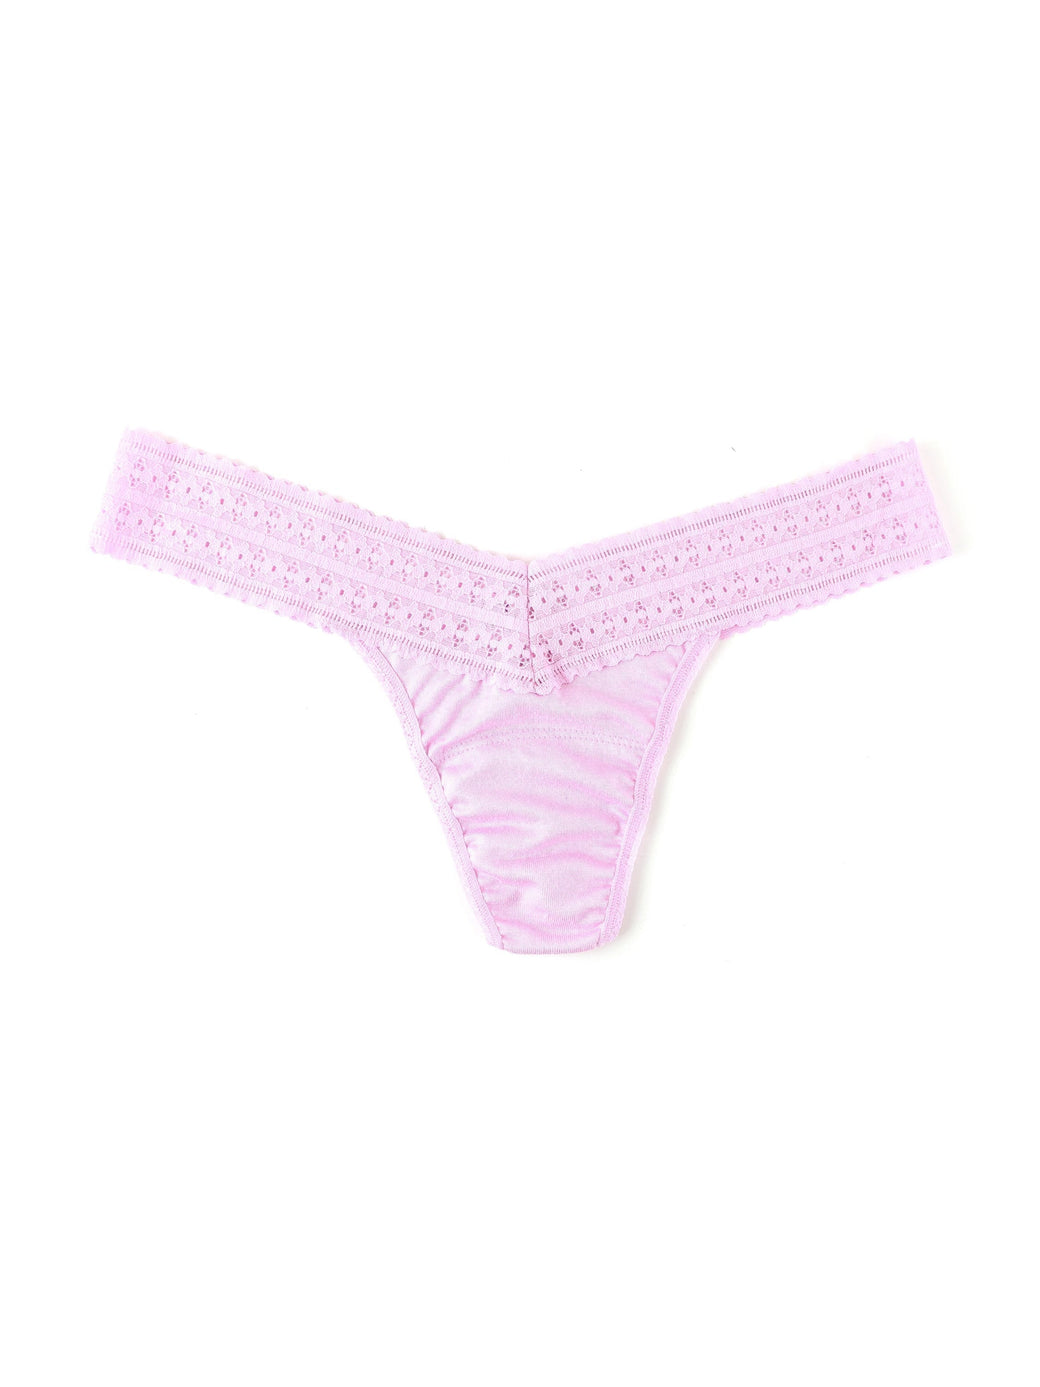 Dream Low Rise Thong-COTTON CANDY PINK-Hanky Panky